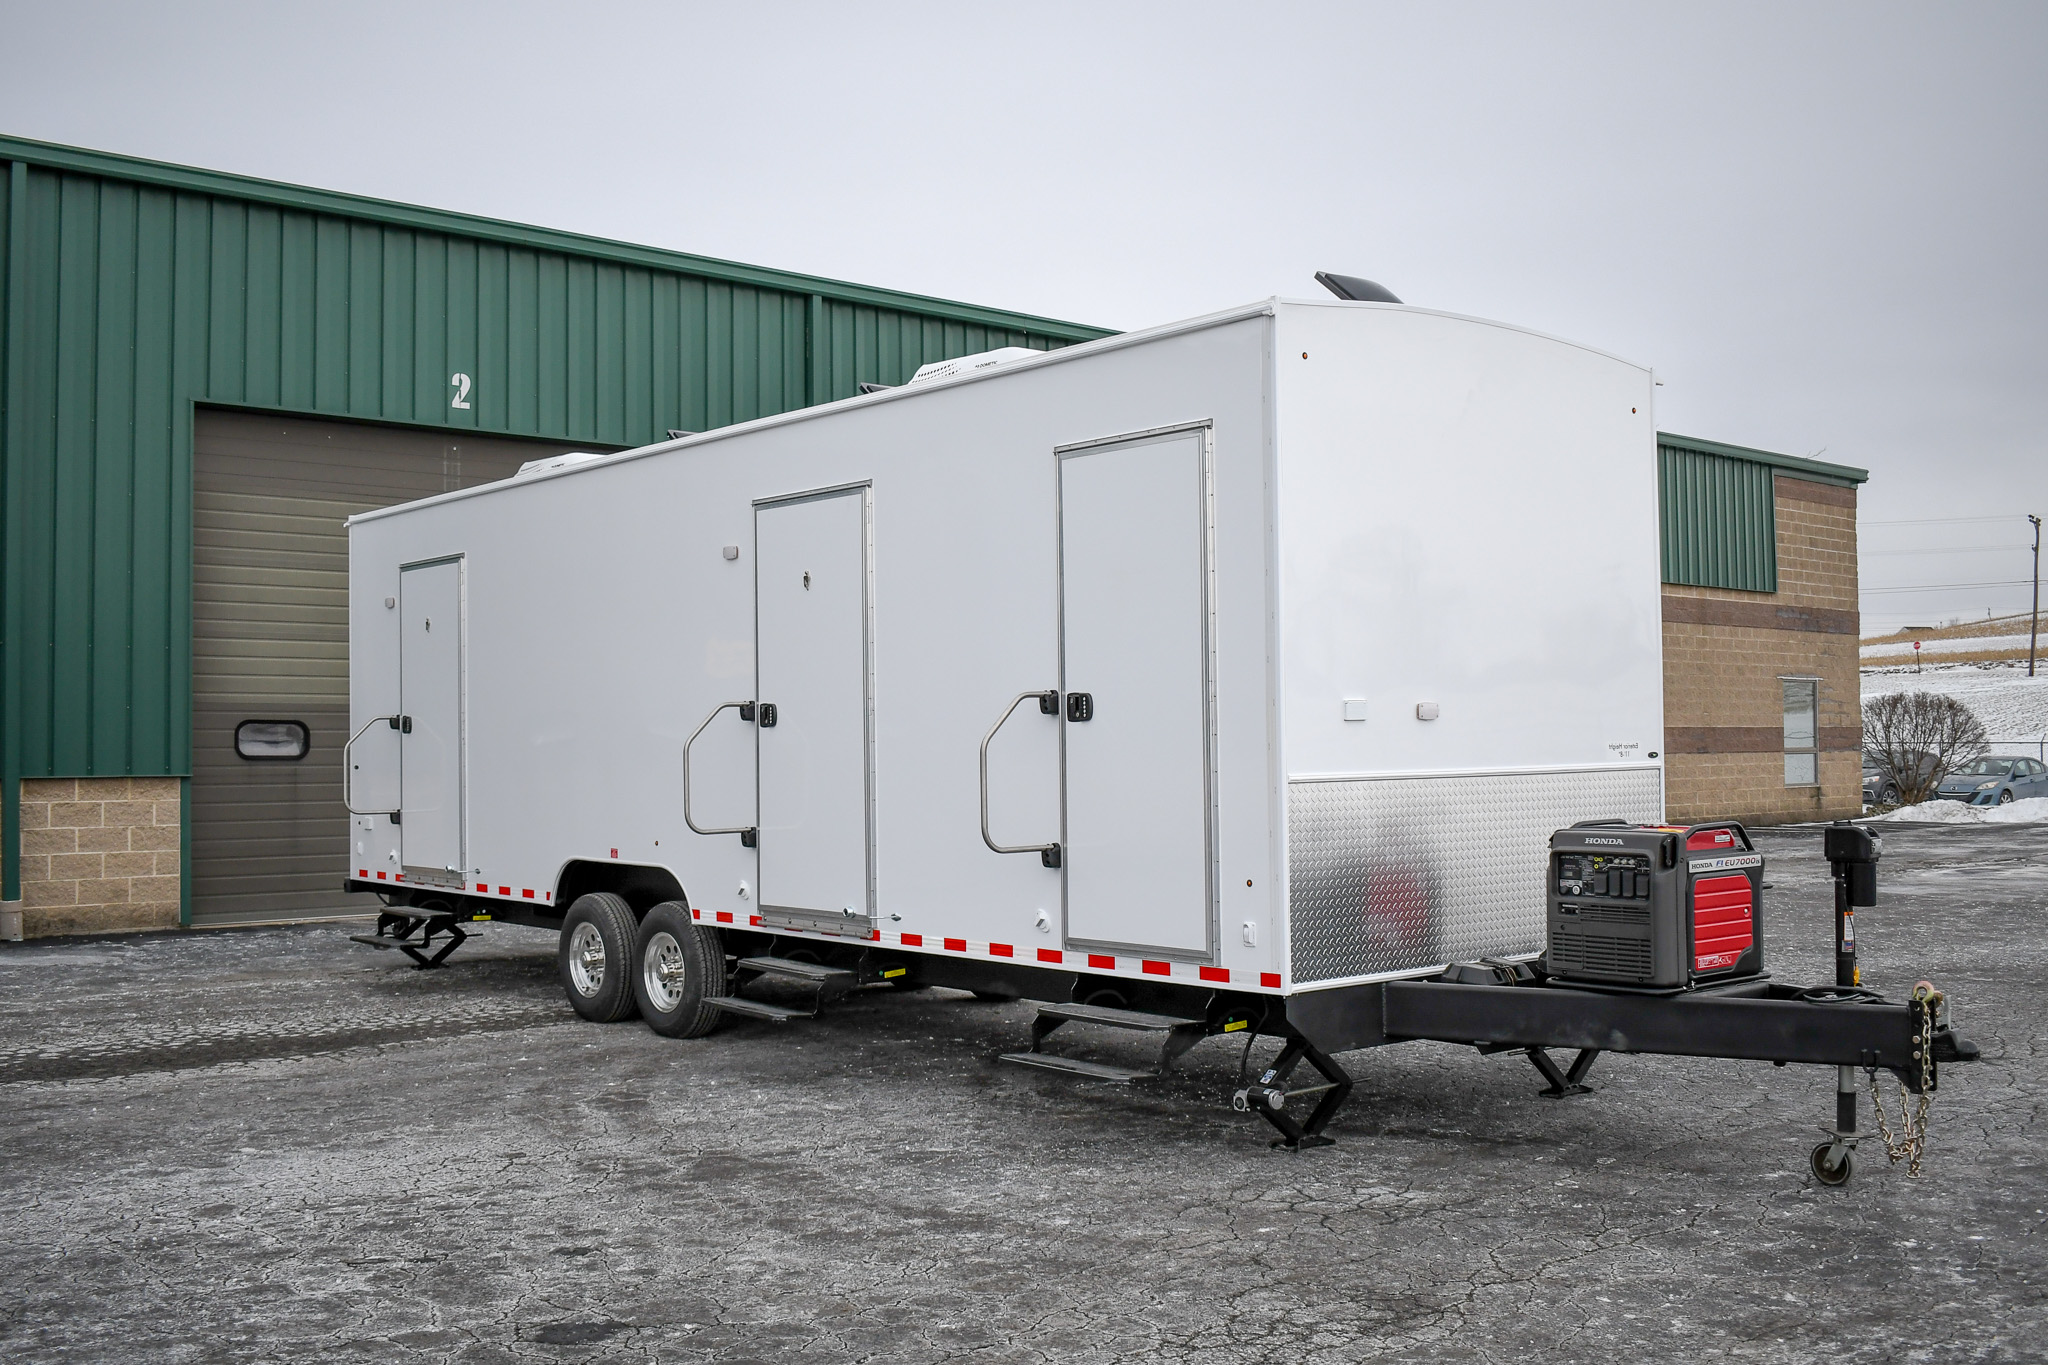 An exterior view of the unit for Merrillville, IN.